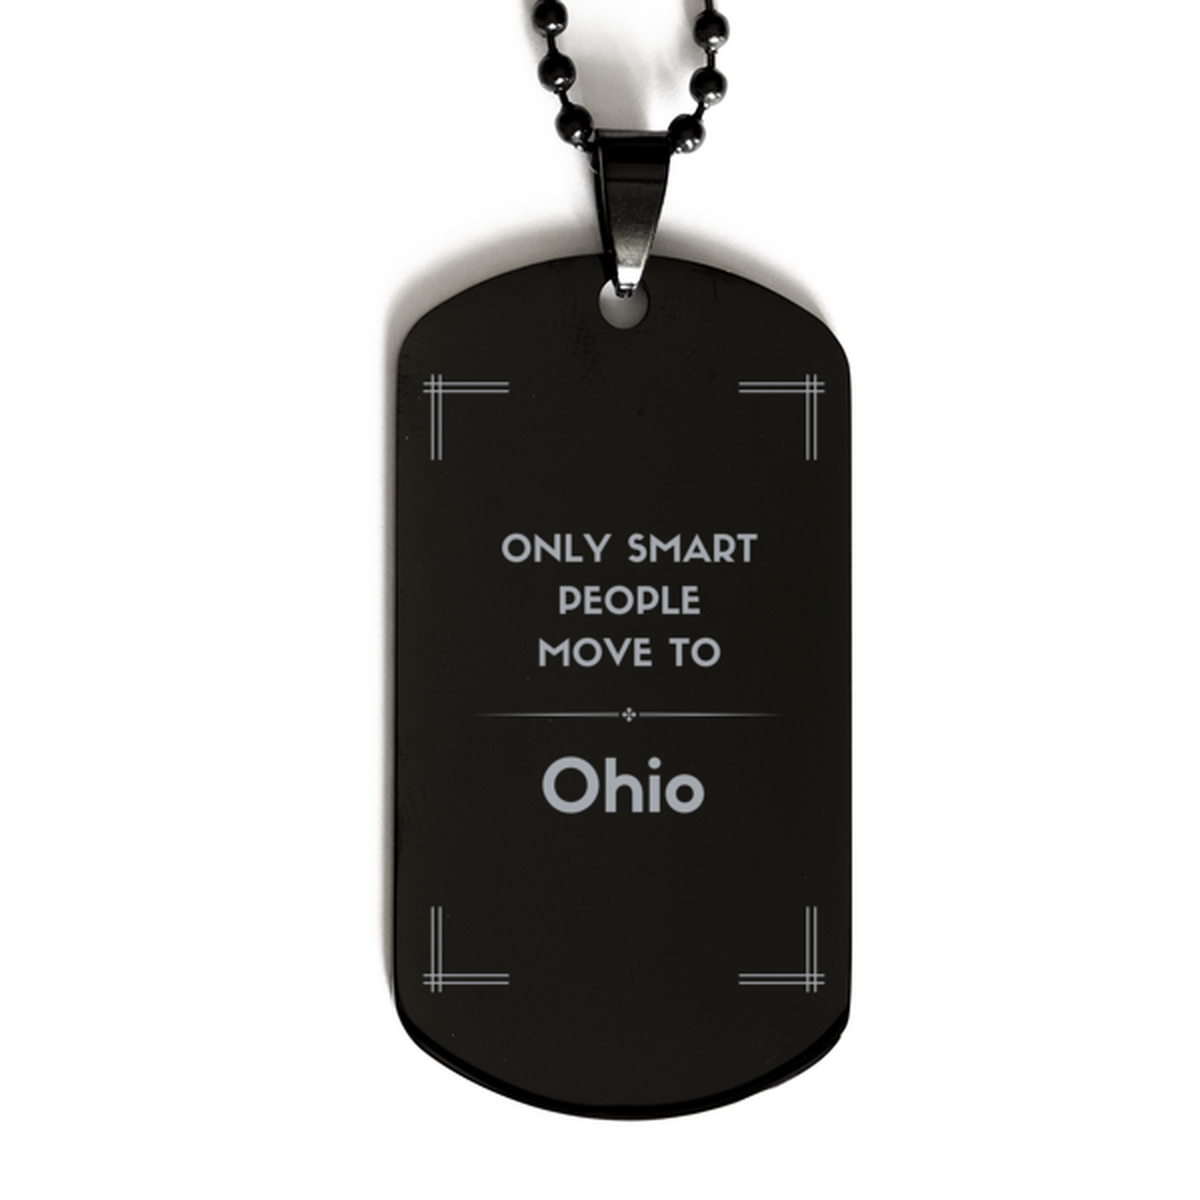 Only smart people move to Ohio Black Dog Tag, Gag Gifts For Ohio, Move to Ohio Gifts for Friends Coworker Funny Saying Quote